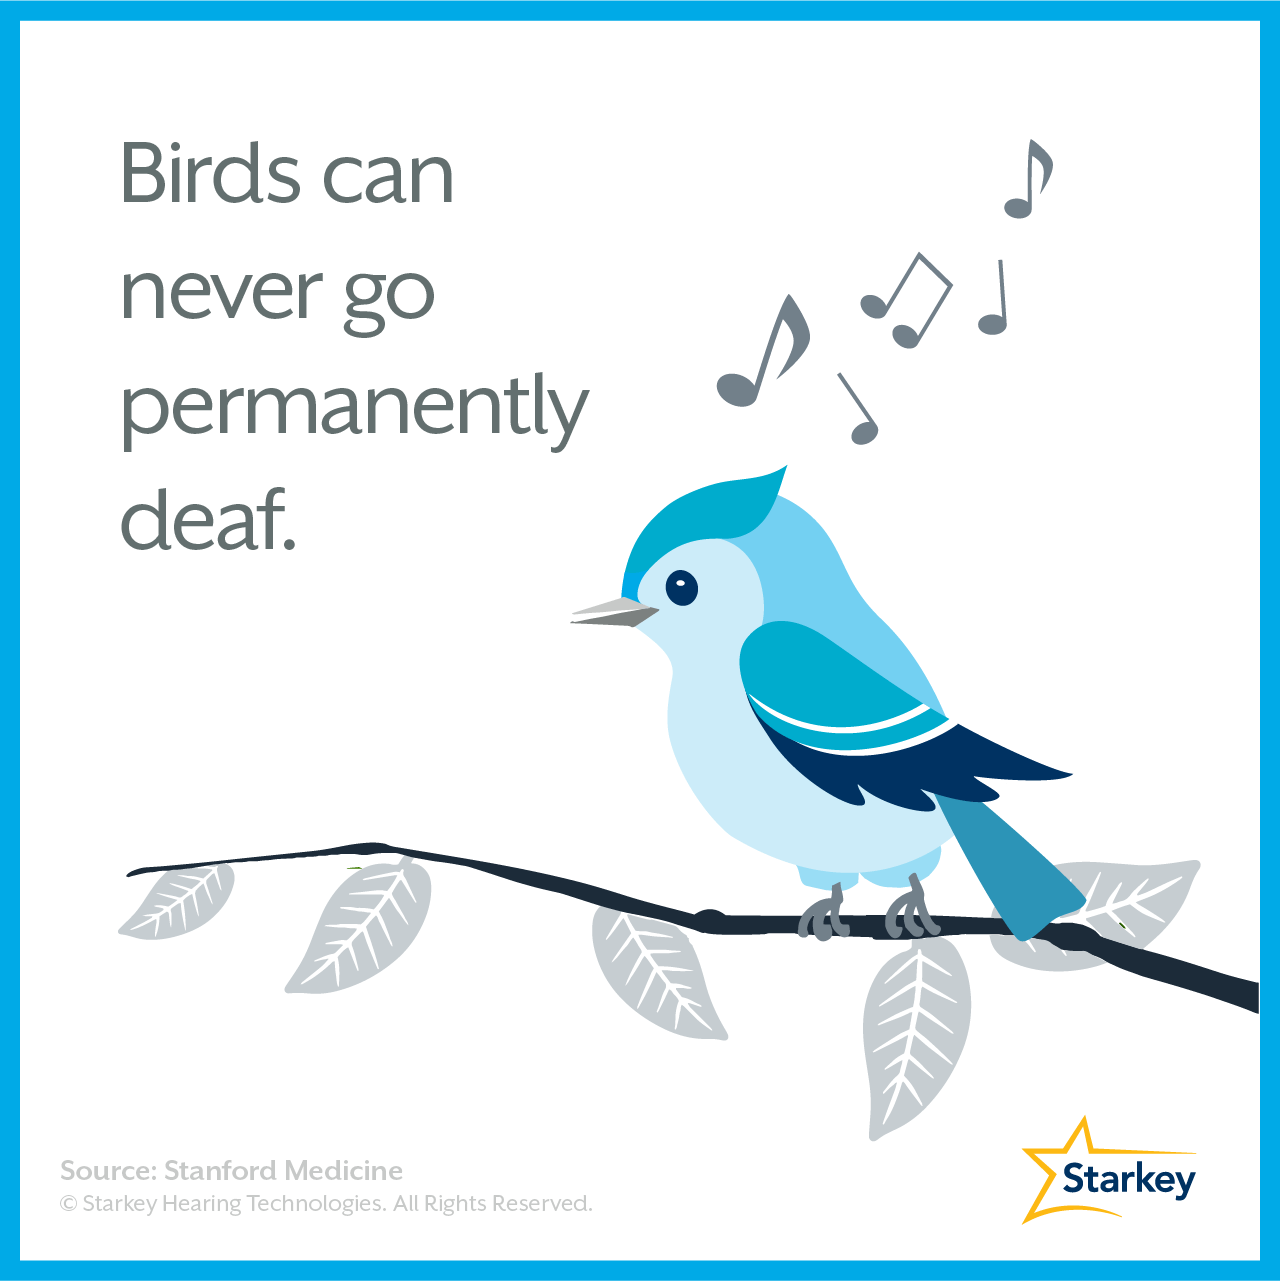 Why birds can't go permanently deaf